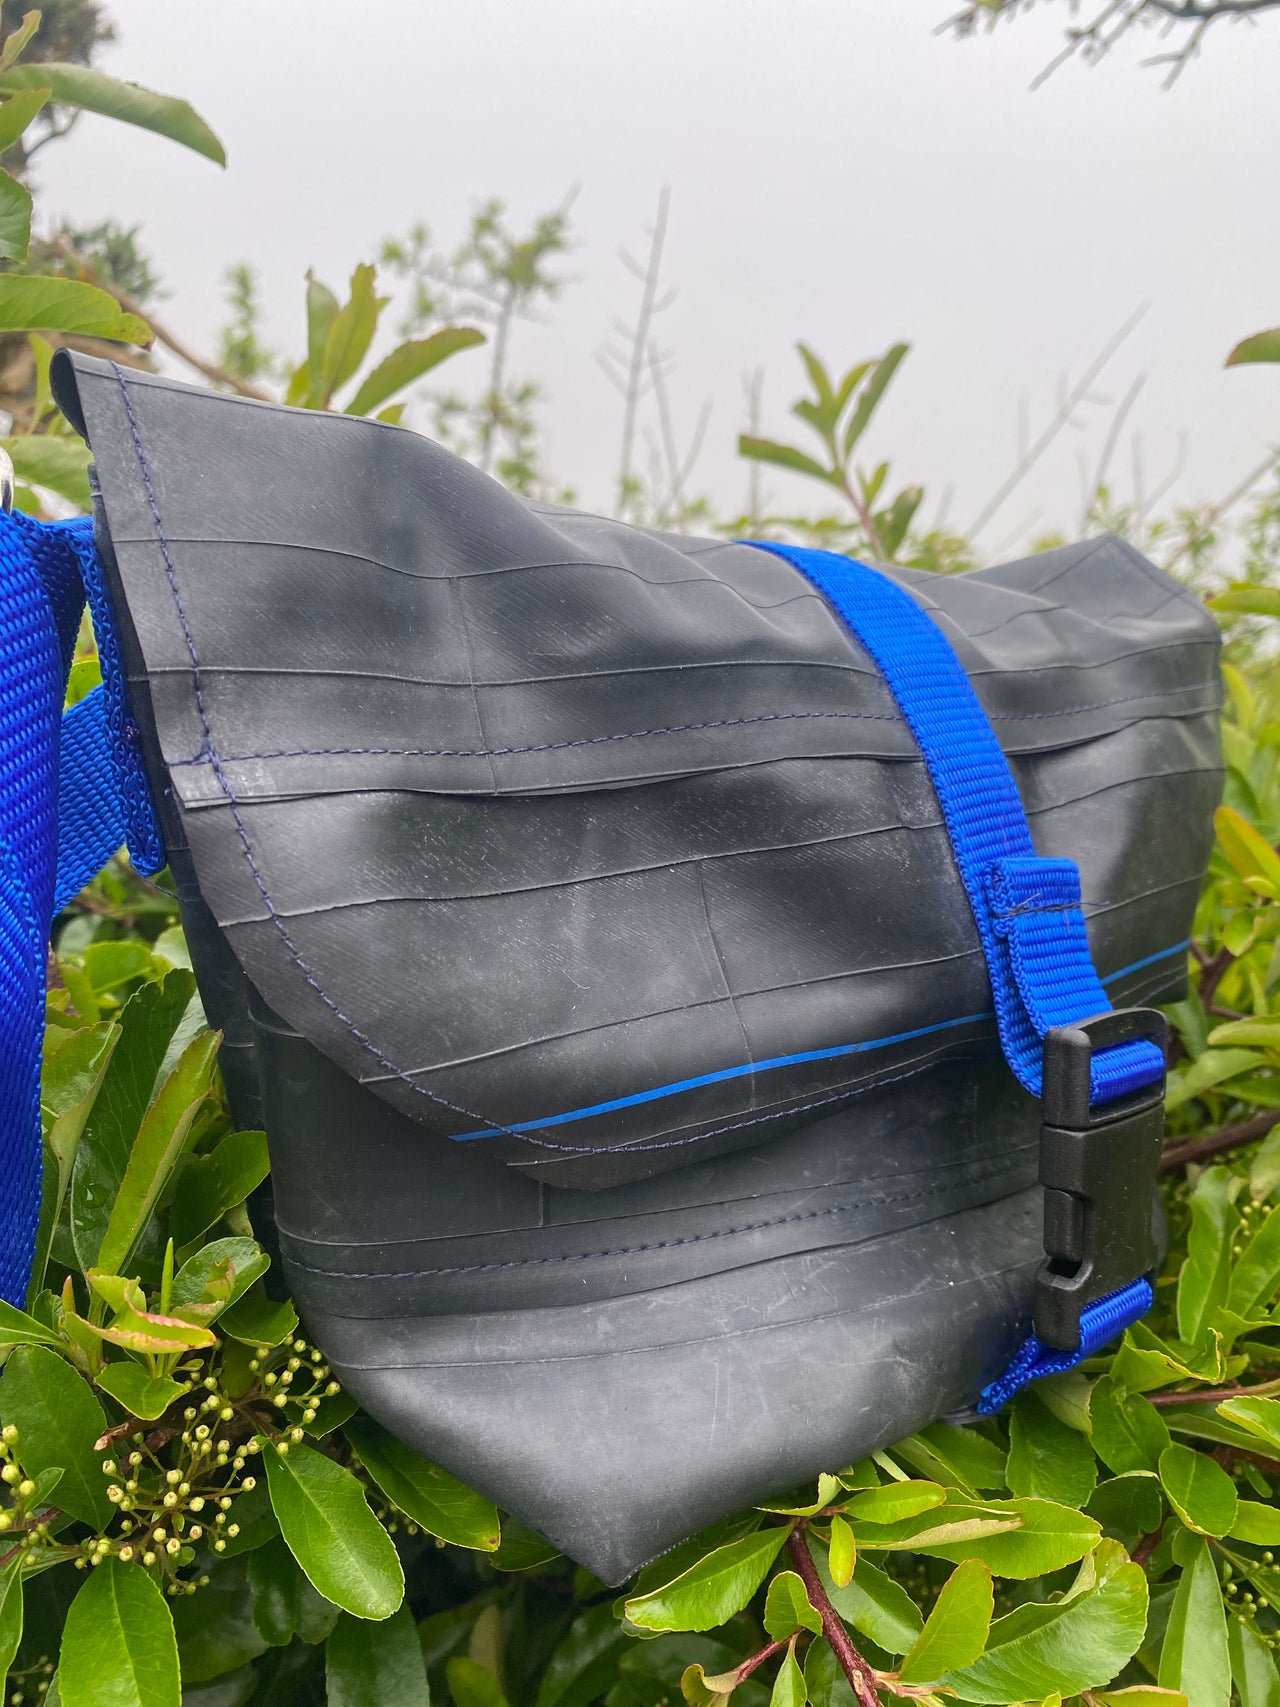 I used to be a Punctured Inner Tube - Saddle Bag